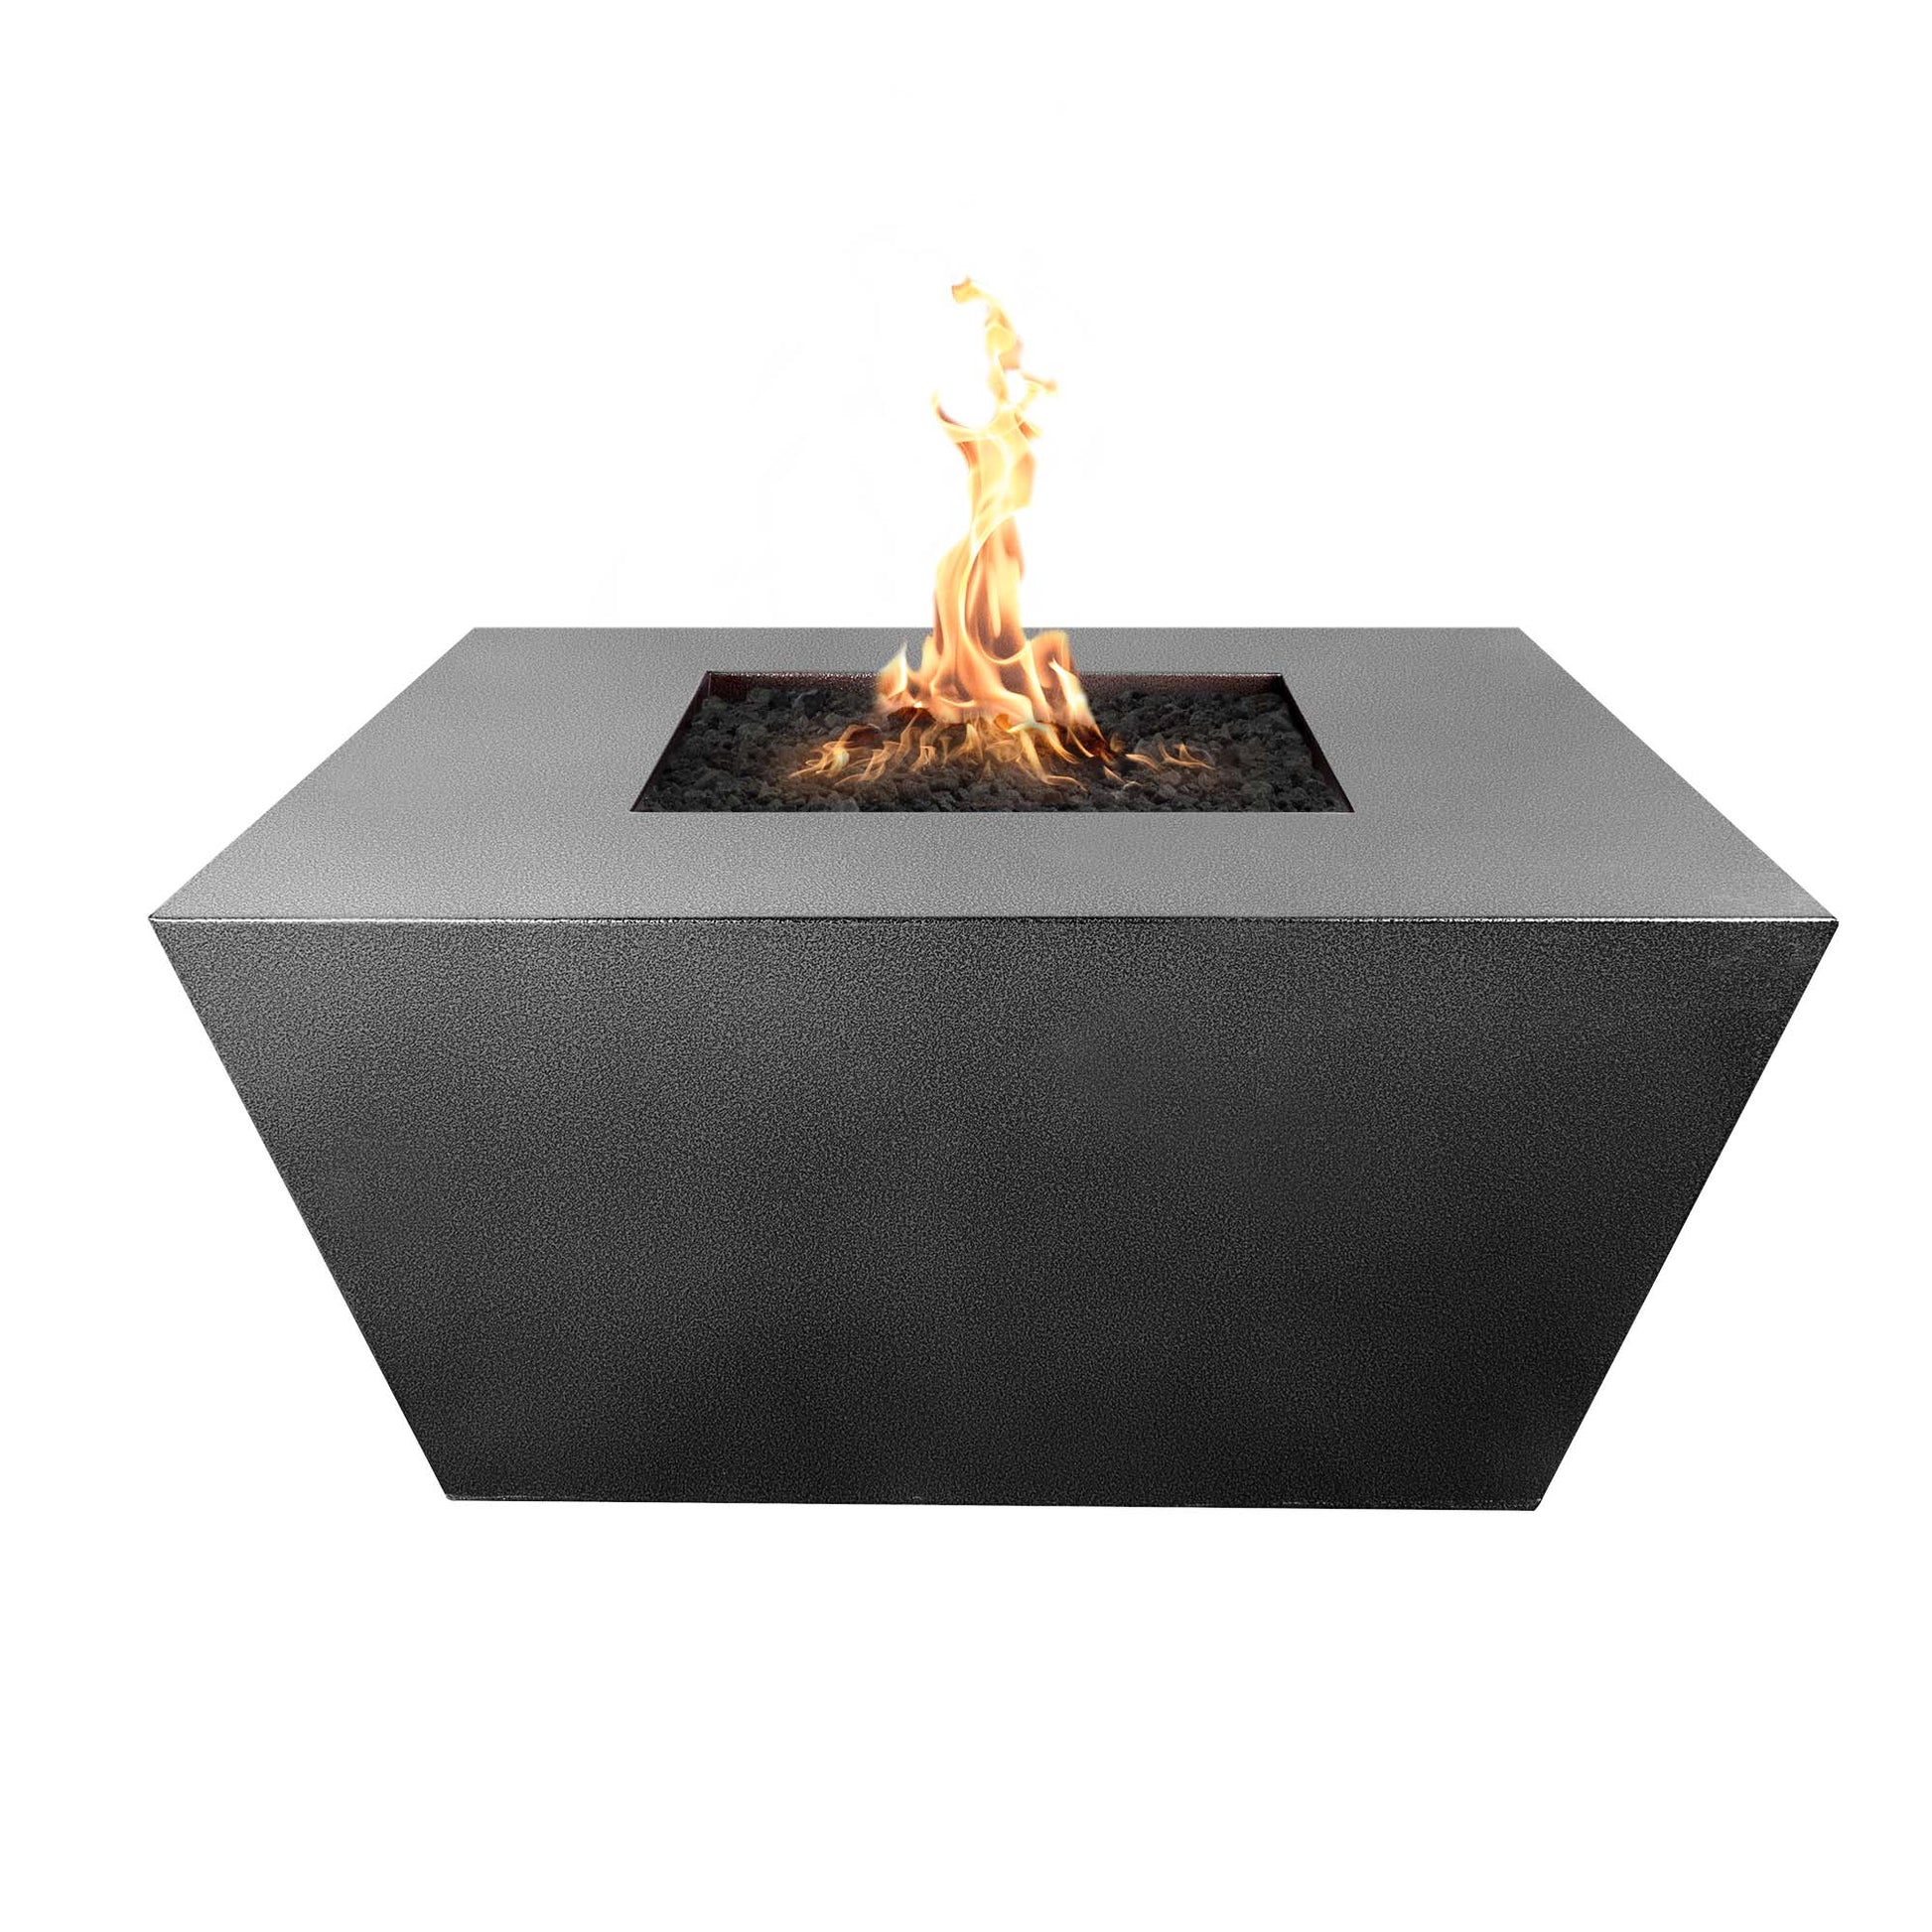 The Outdoor Plus Square Redan 48" Corten Steel Natural Gas Fire Pit with Match Lit with Flame Sense Ignition